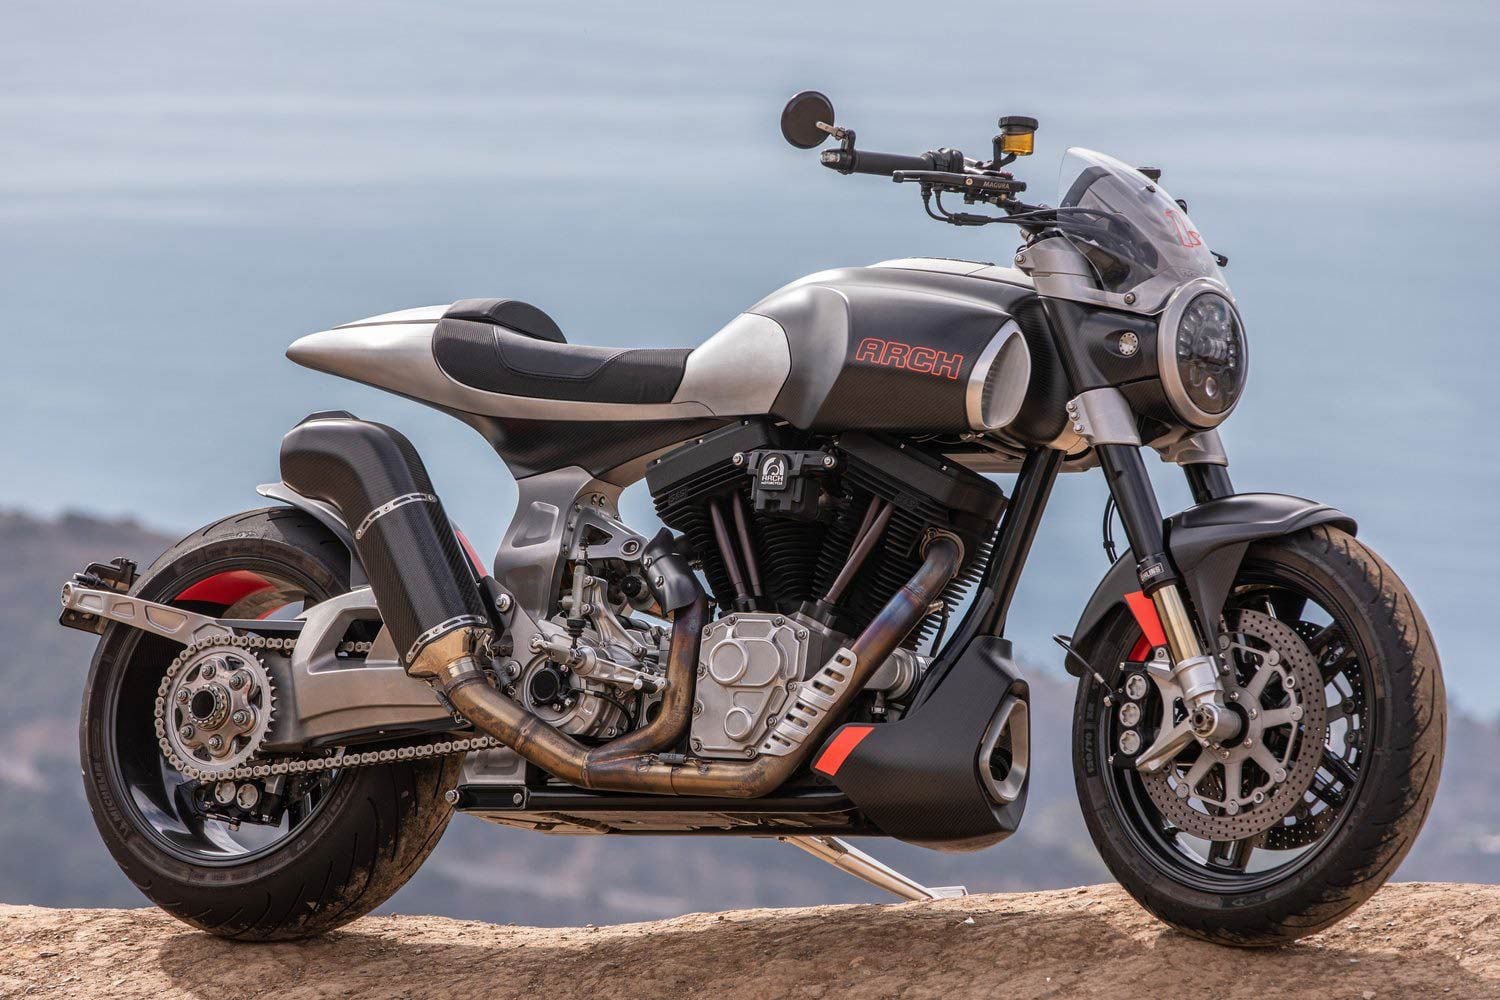 Los Angeles–based Arch Motorcycle has officially launched its second production model, the Arch 1s.